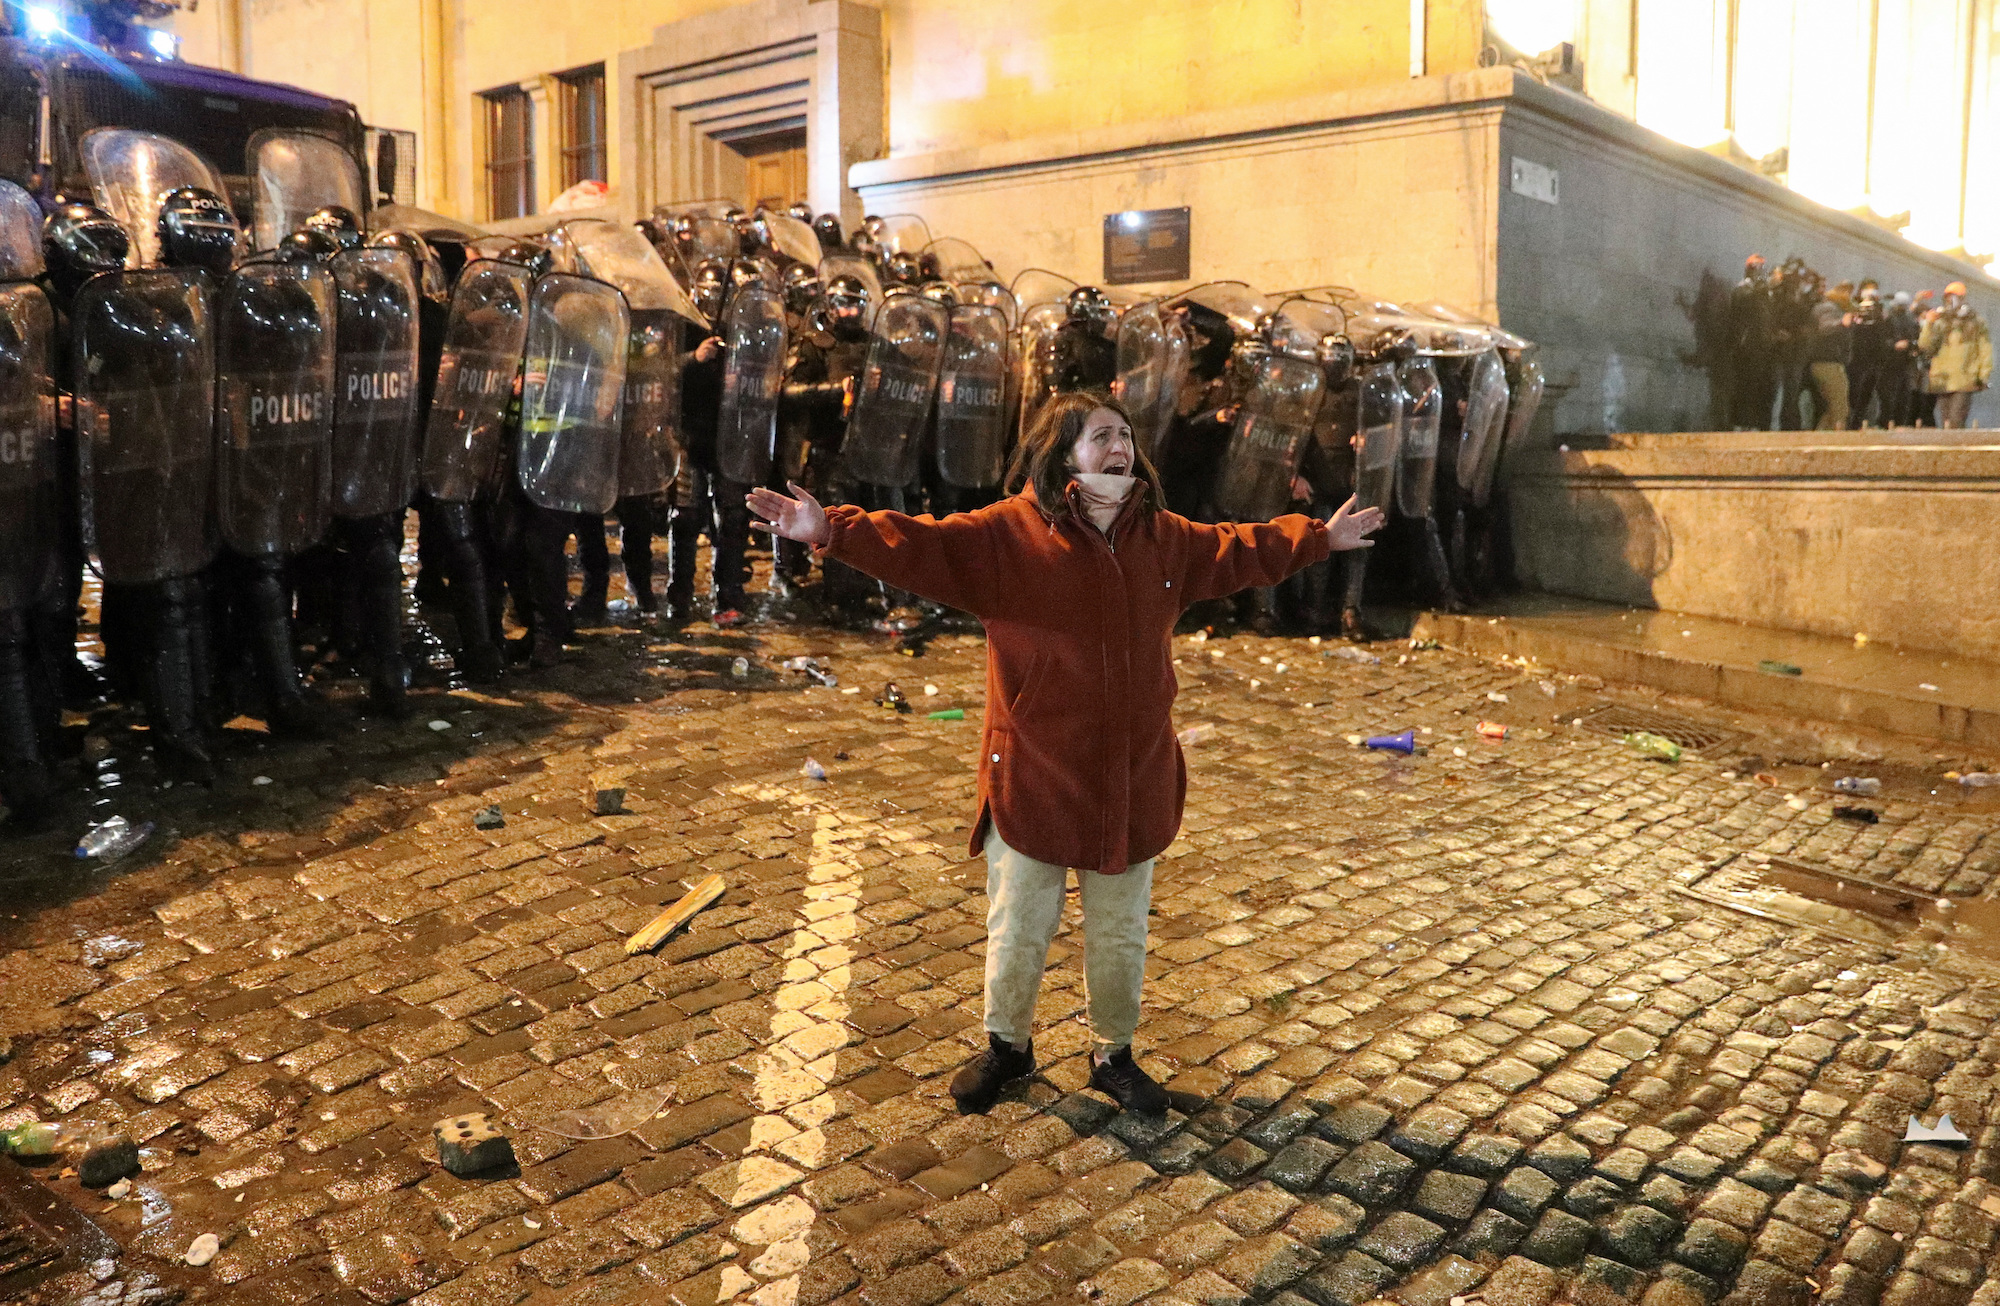 A woman reacts while standing in front of riot police who are blocking the street.